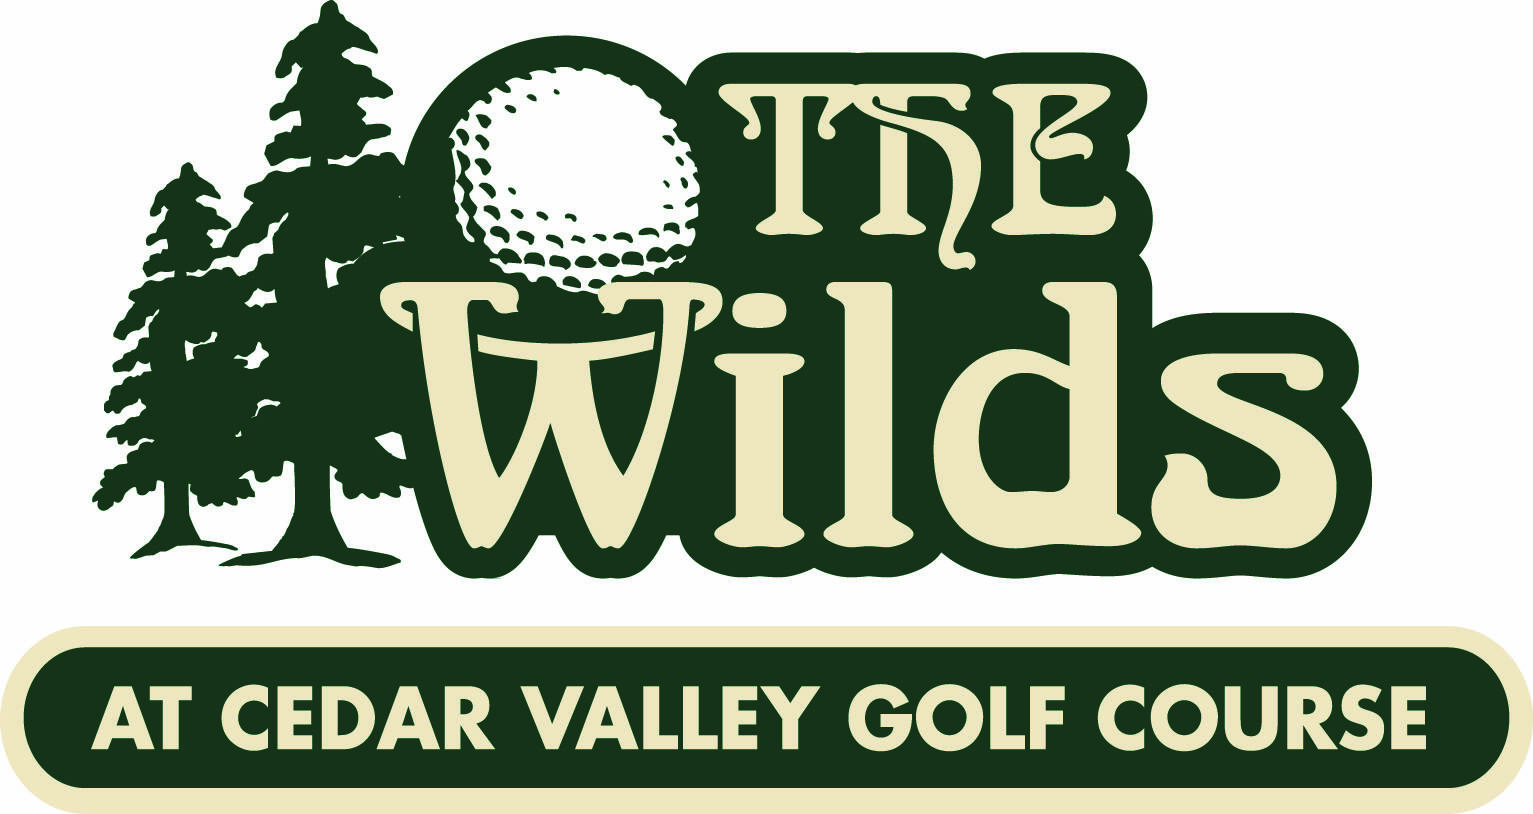 The Wilds at Cedar Valley Golf Course